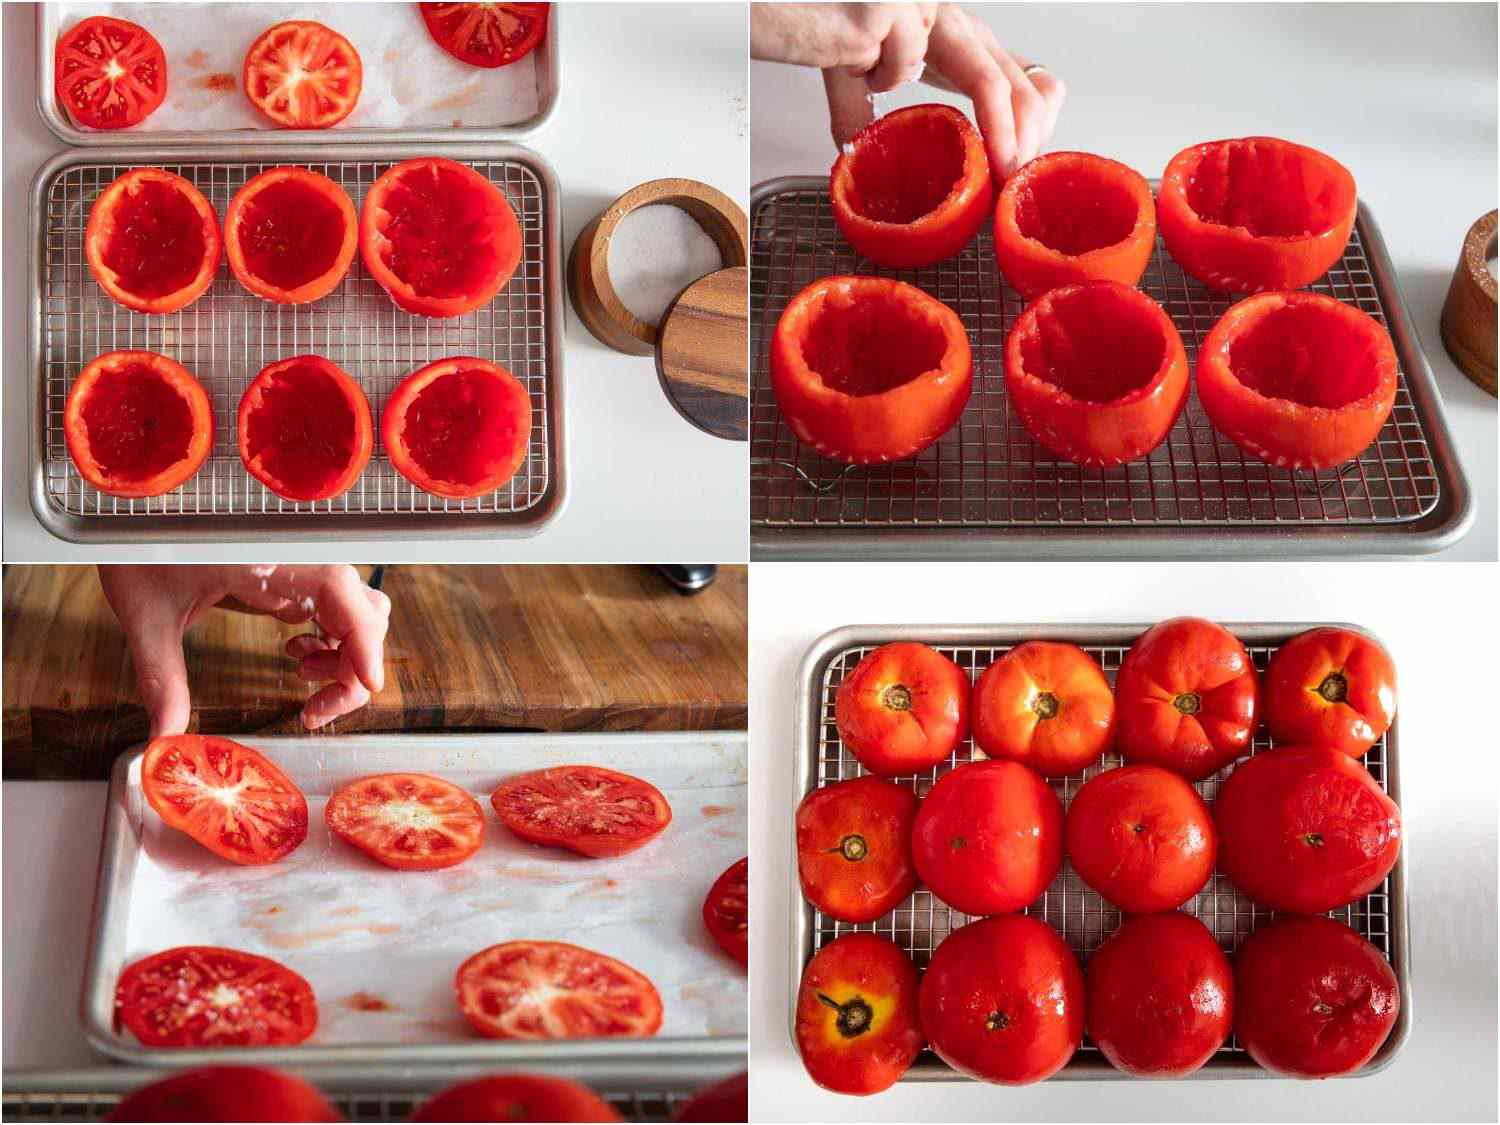 Photo collage of salting hollowed out tomatoes and placing them upside down on a wire rack-lined baking sheet to drain them of excess moisture.